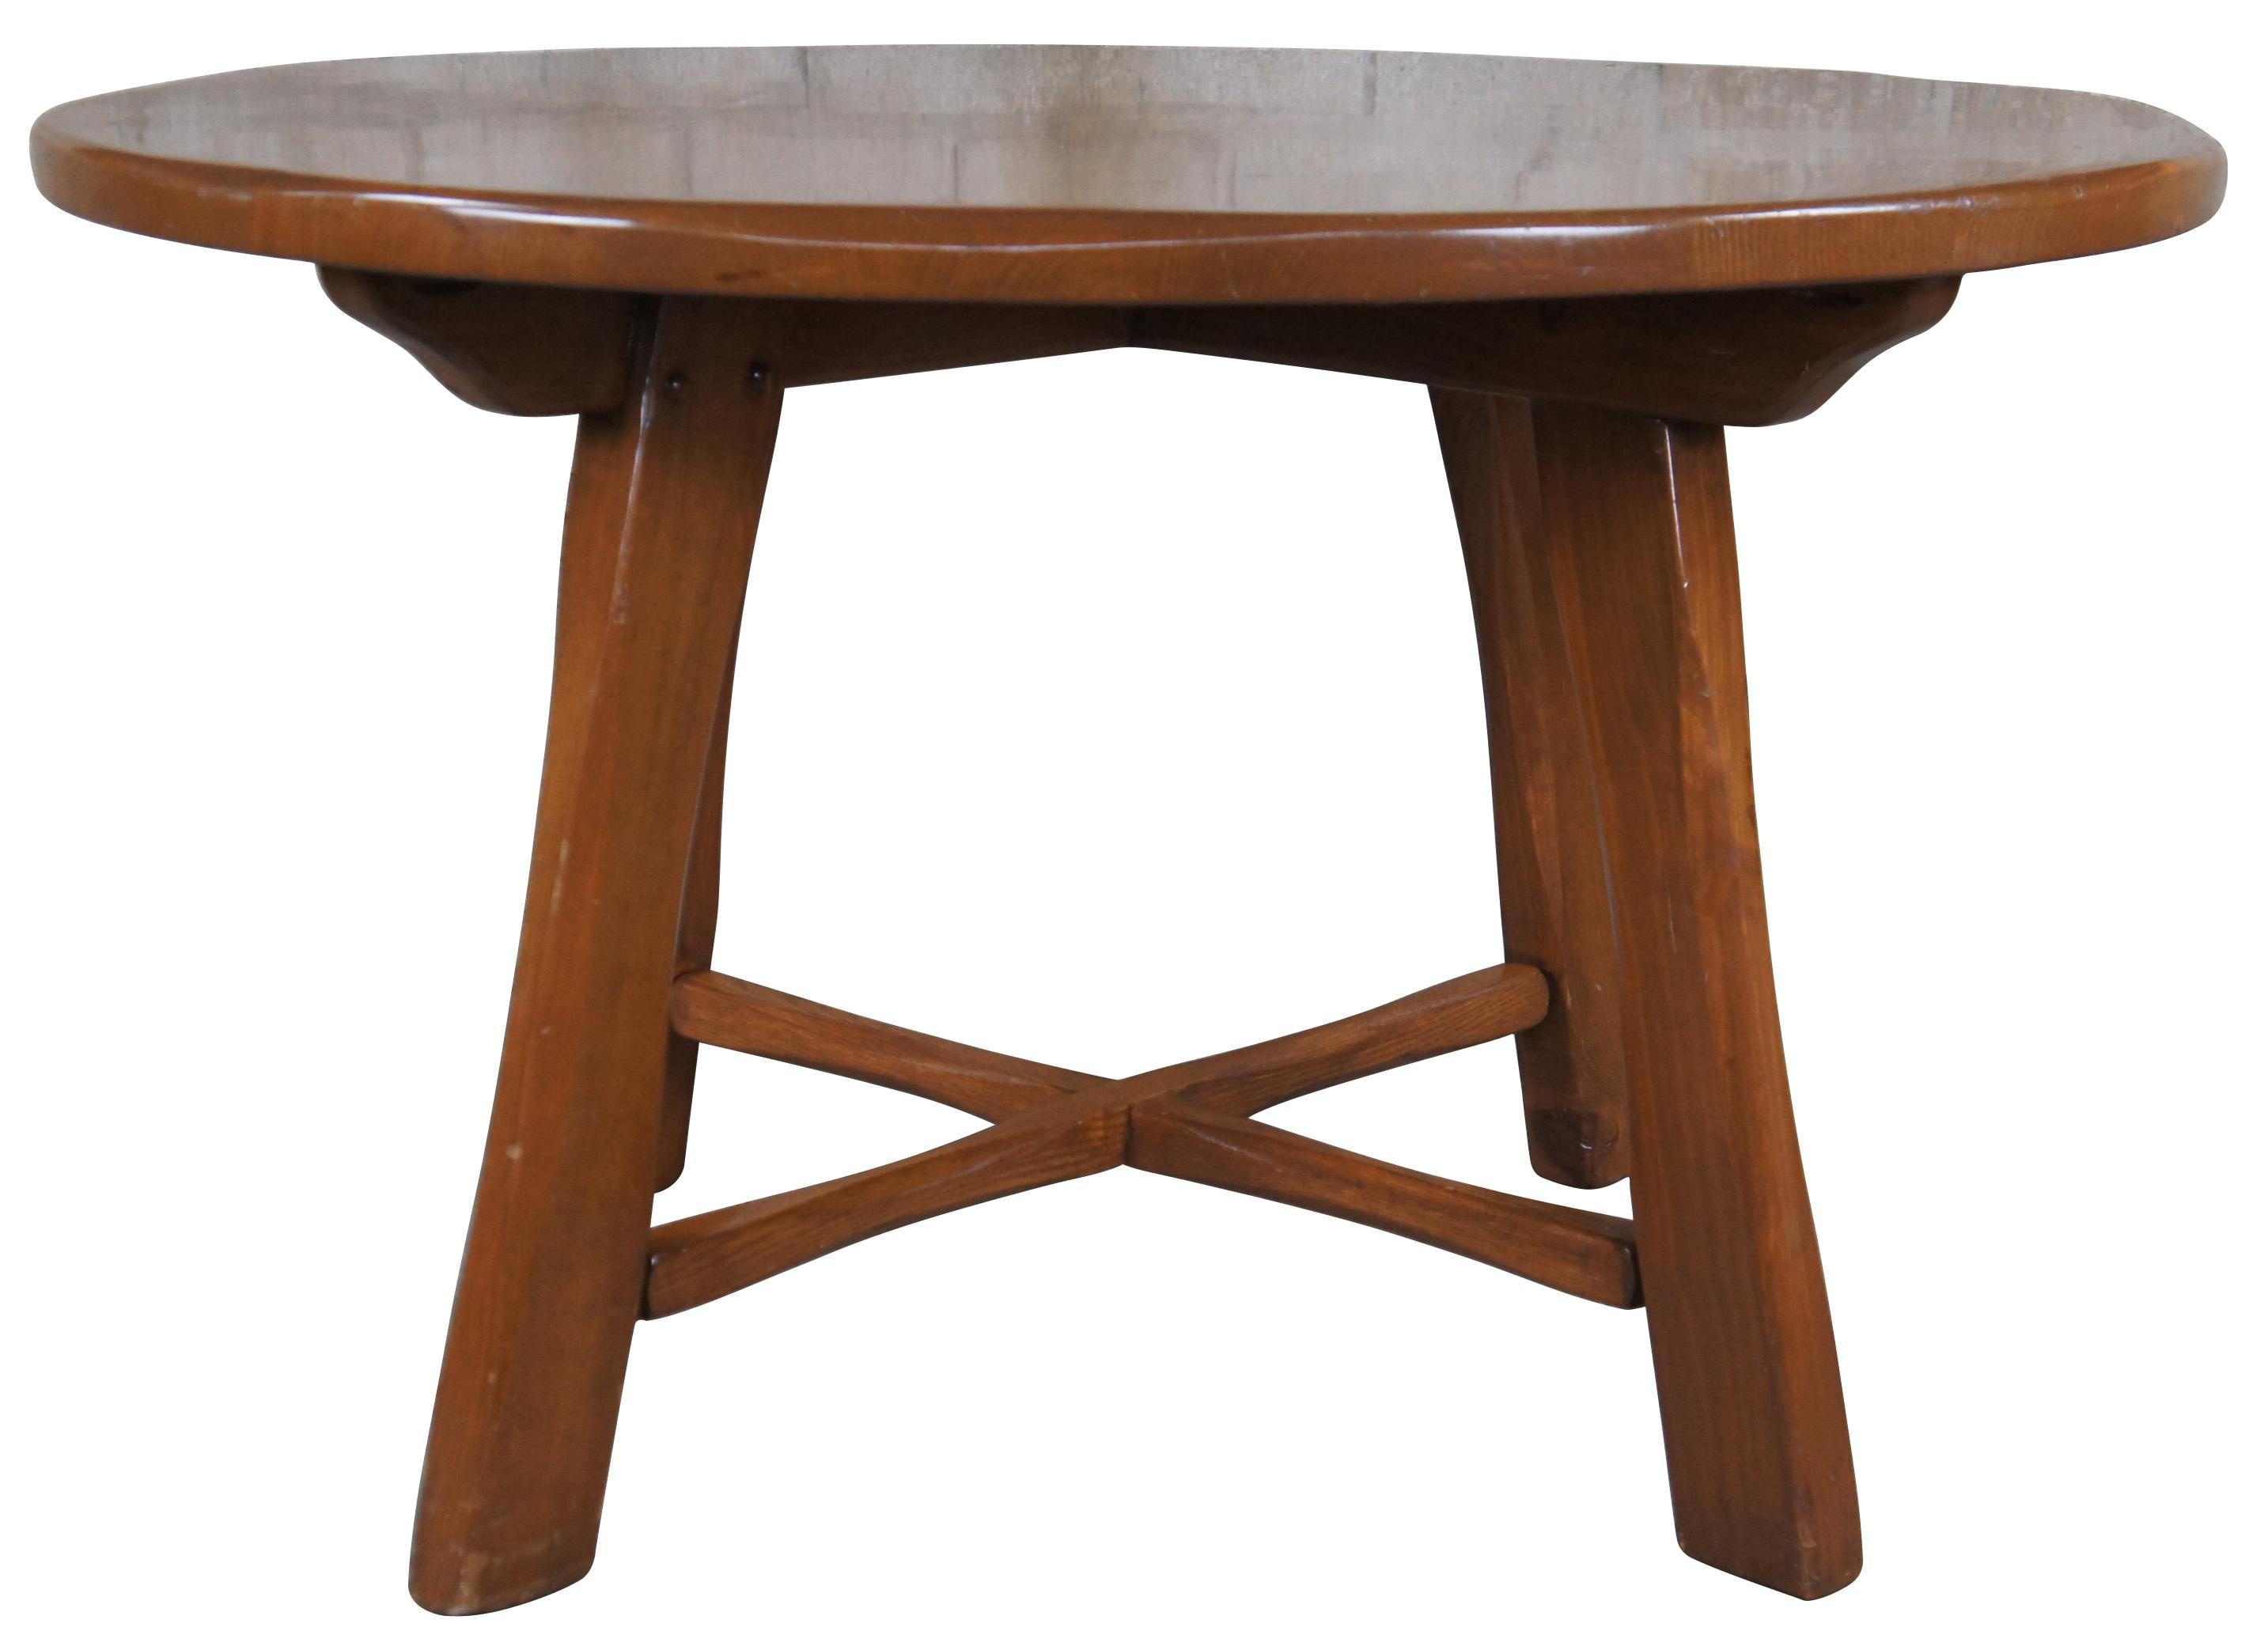 Handmade vintage farmhouse dining table. Features a solid pine top over an oak base. Made in Darien Connecticut circa 1960s.
 